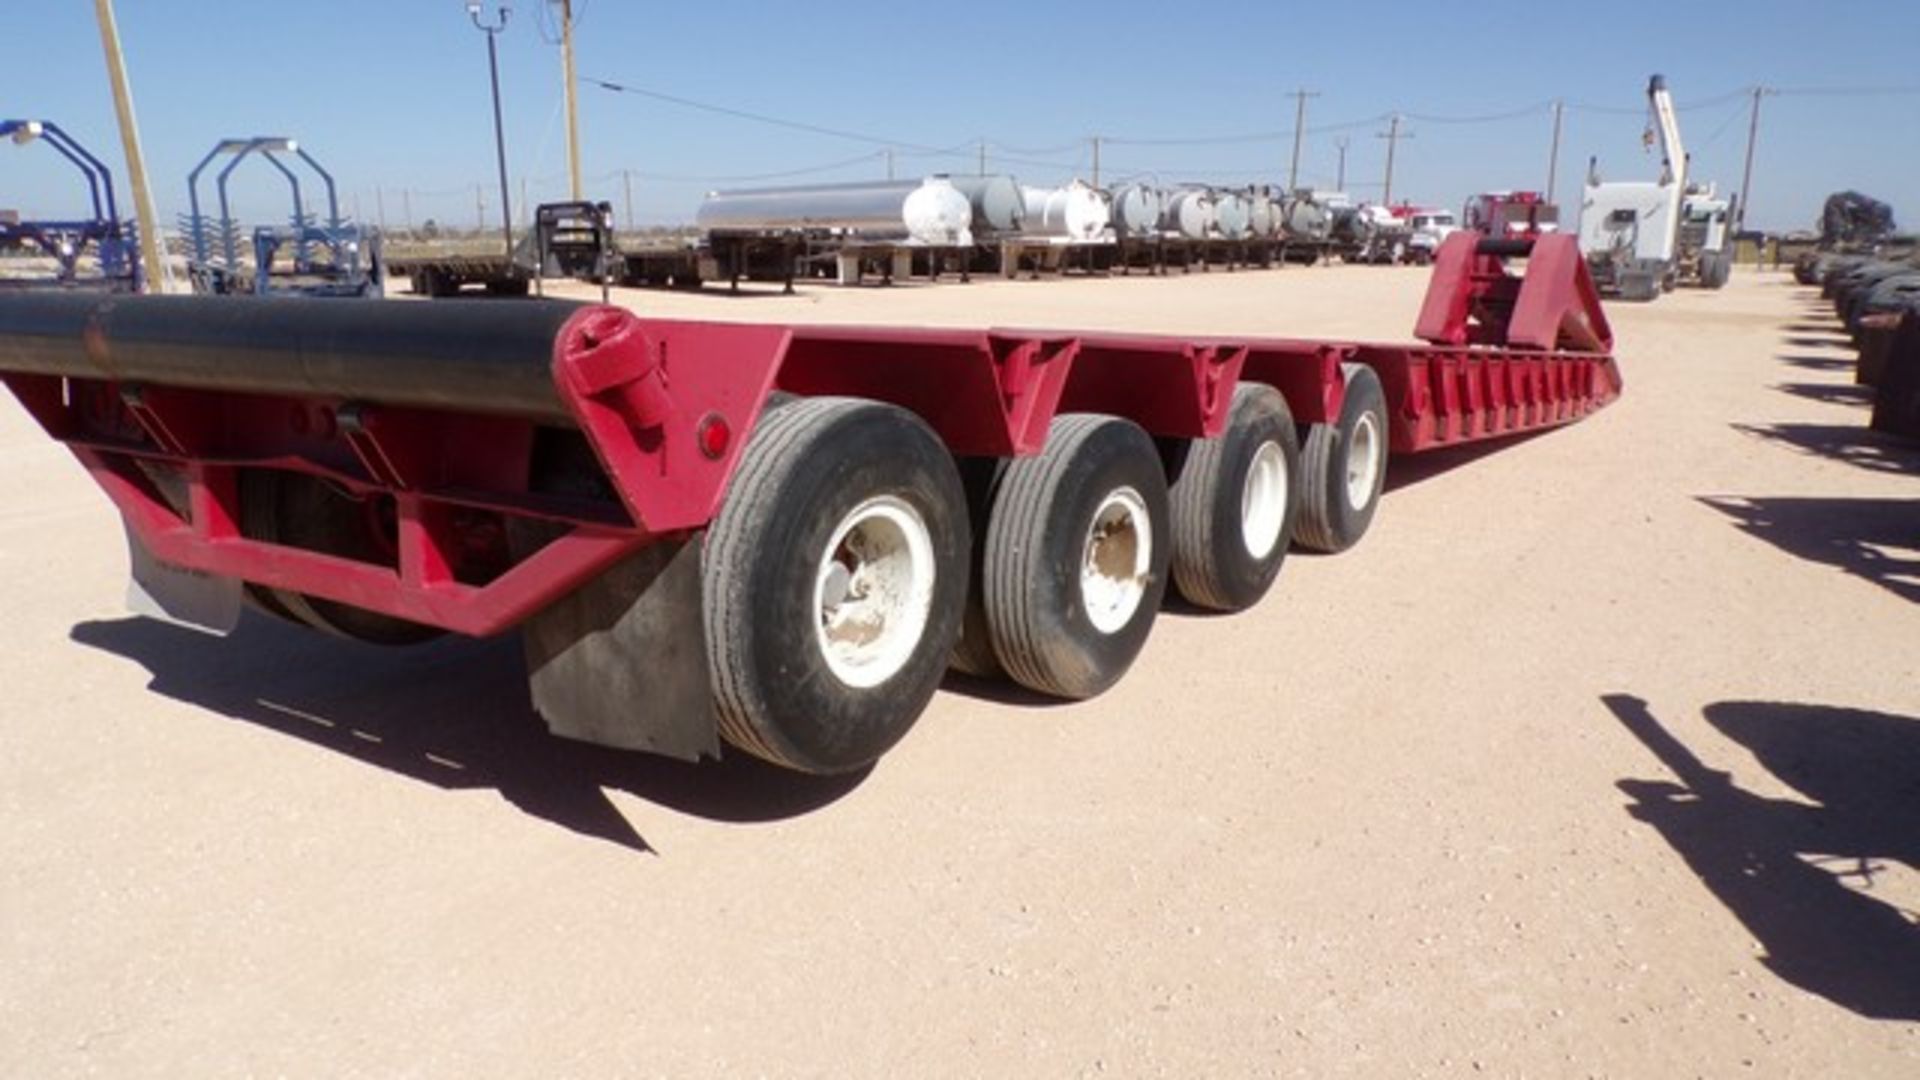 Located in YARD 1 - Midland, TX (6337) (X) 1982 HERCULES 40' 4 AXLE MANUAL RGN LOWBOY TRAILER, - Image 5 of 5